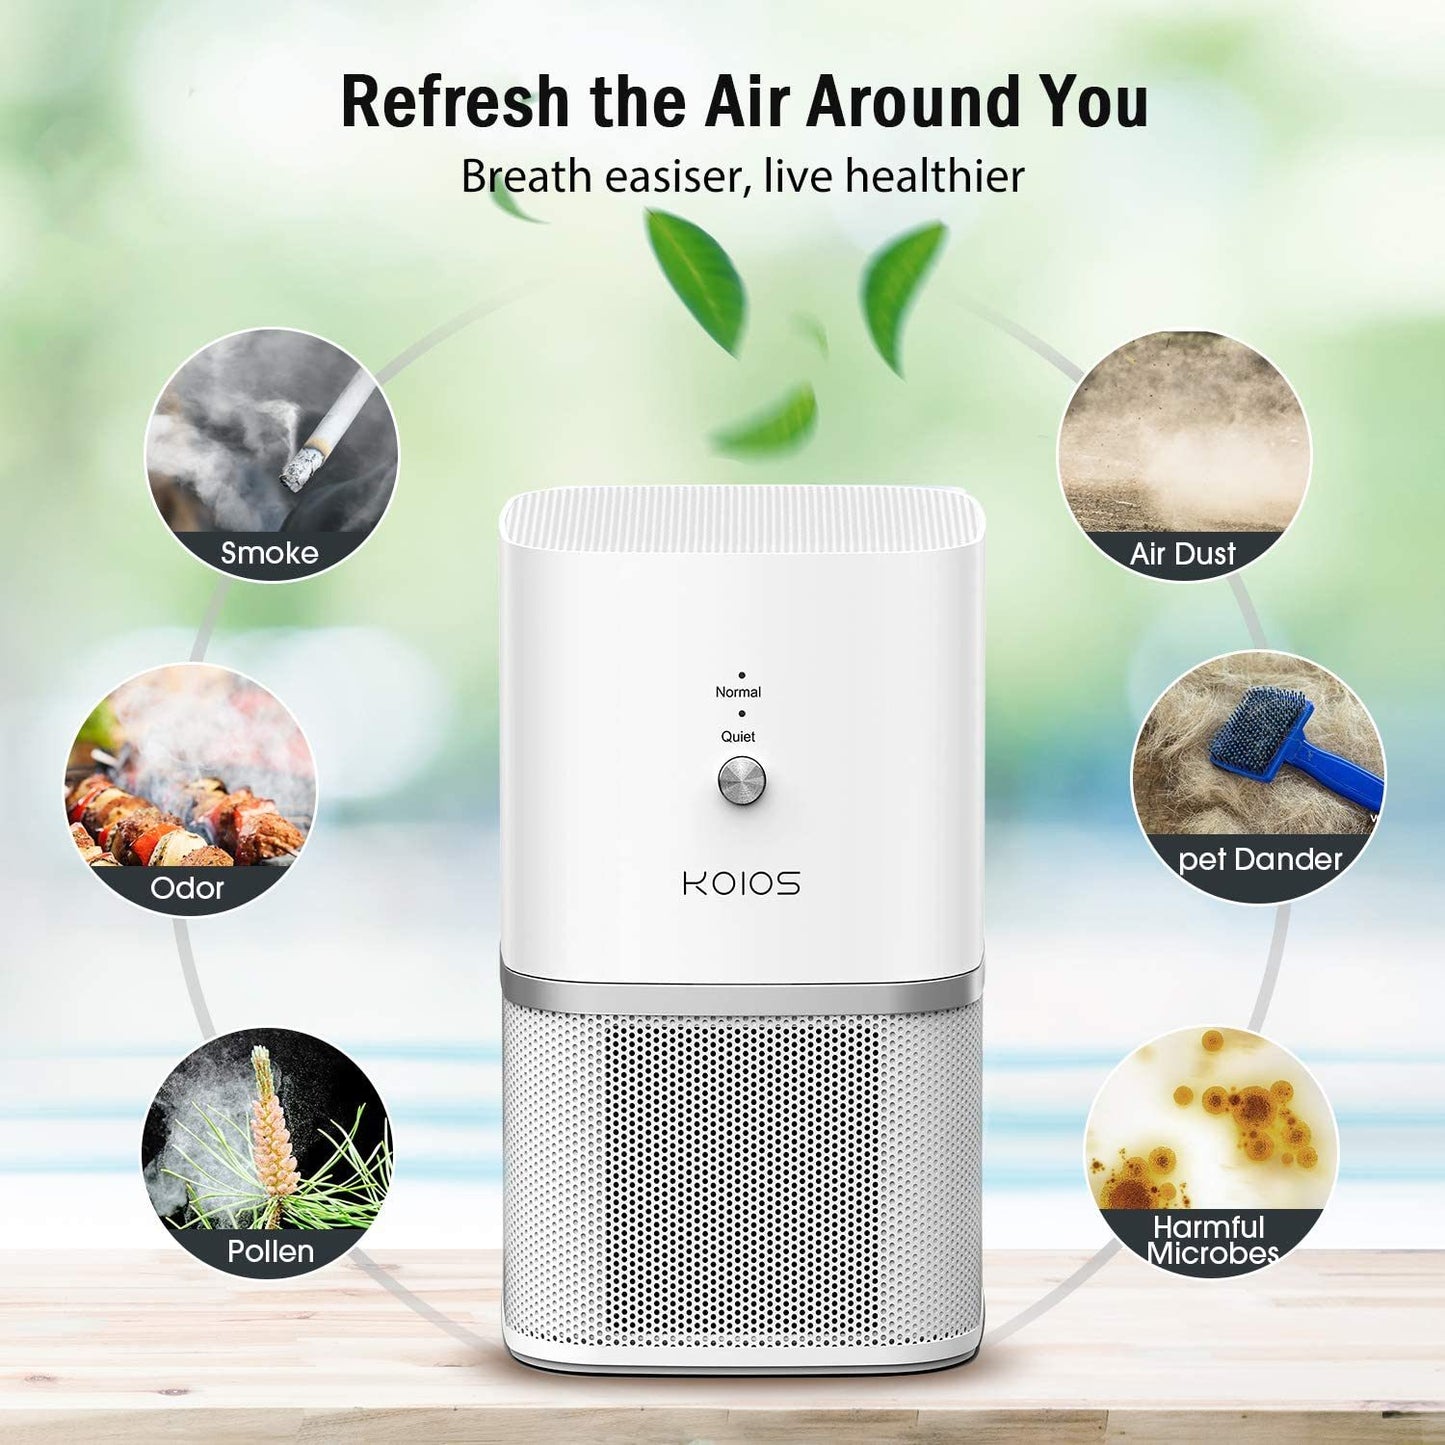 KOIOS Air Purifier for Home, Small Air Purifiers with True HEPA Filter, Air Cleaner for Bedroom Office 219ft², Remove Smoke Dust Pollen Pet Dander, Protable Odor Eliminator, No Ozone